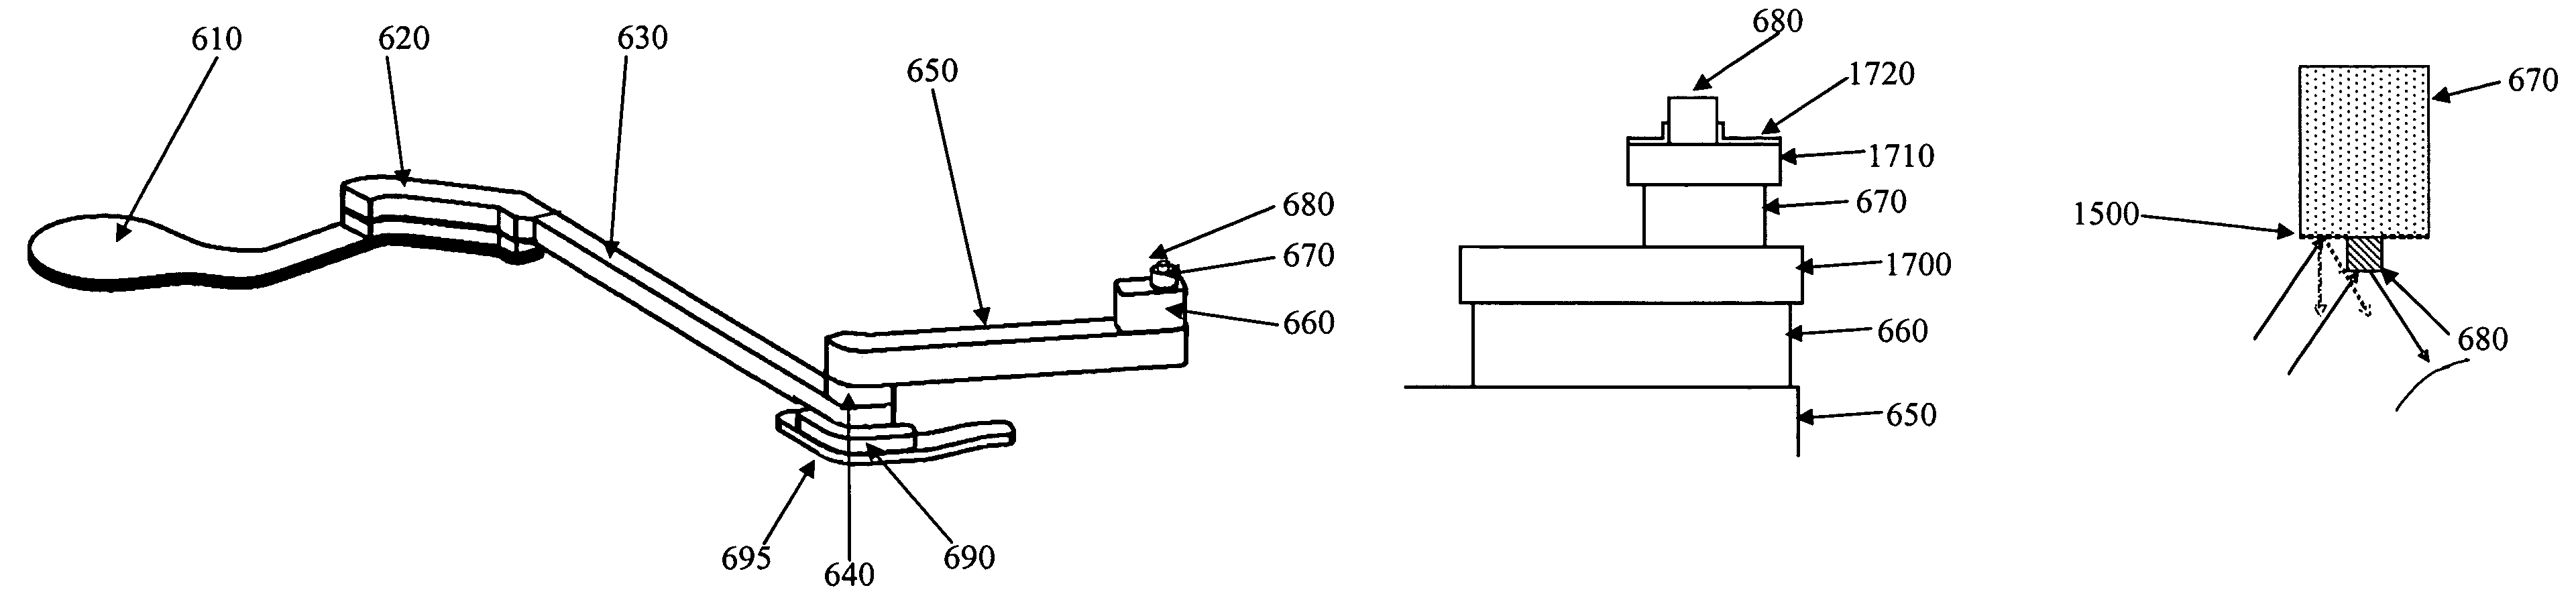 Post and tip design for a probe contact